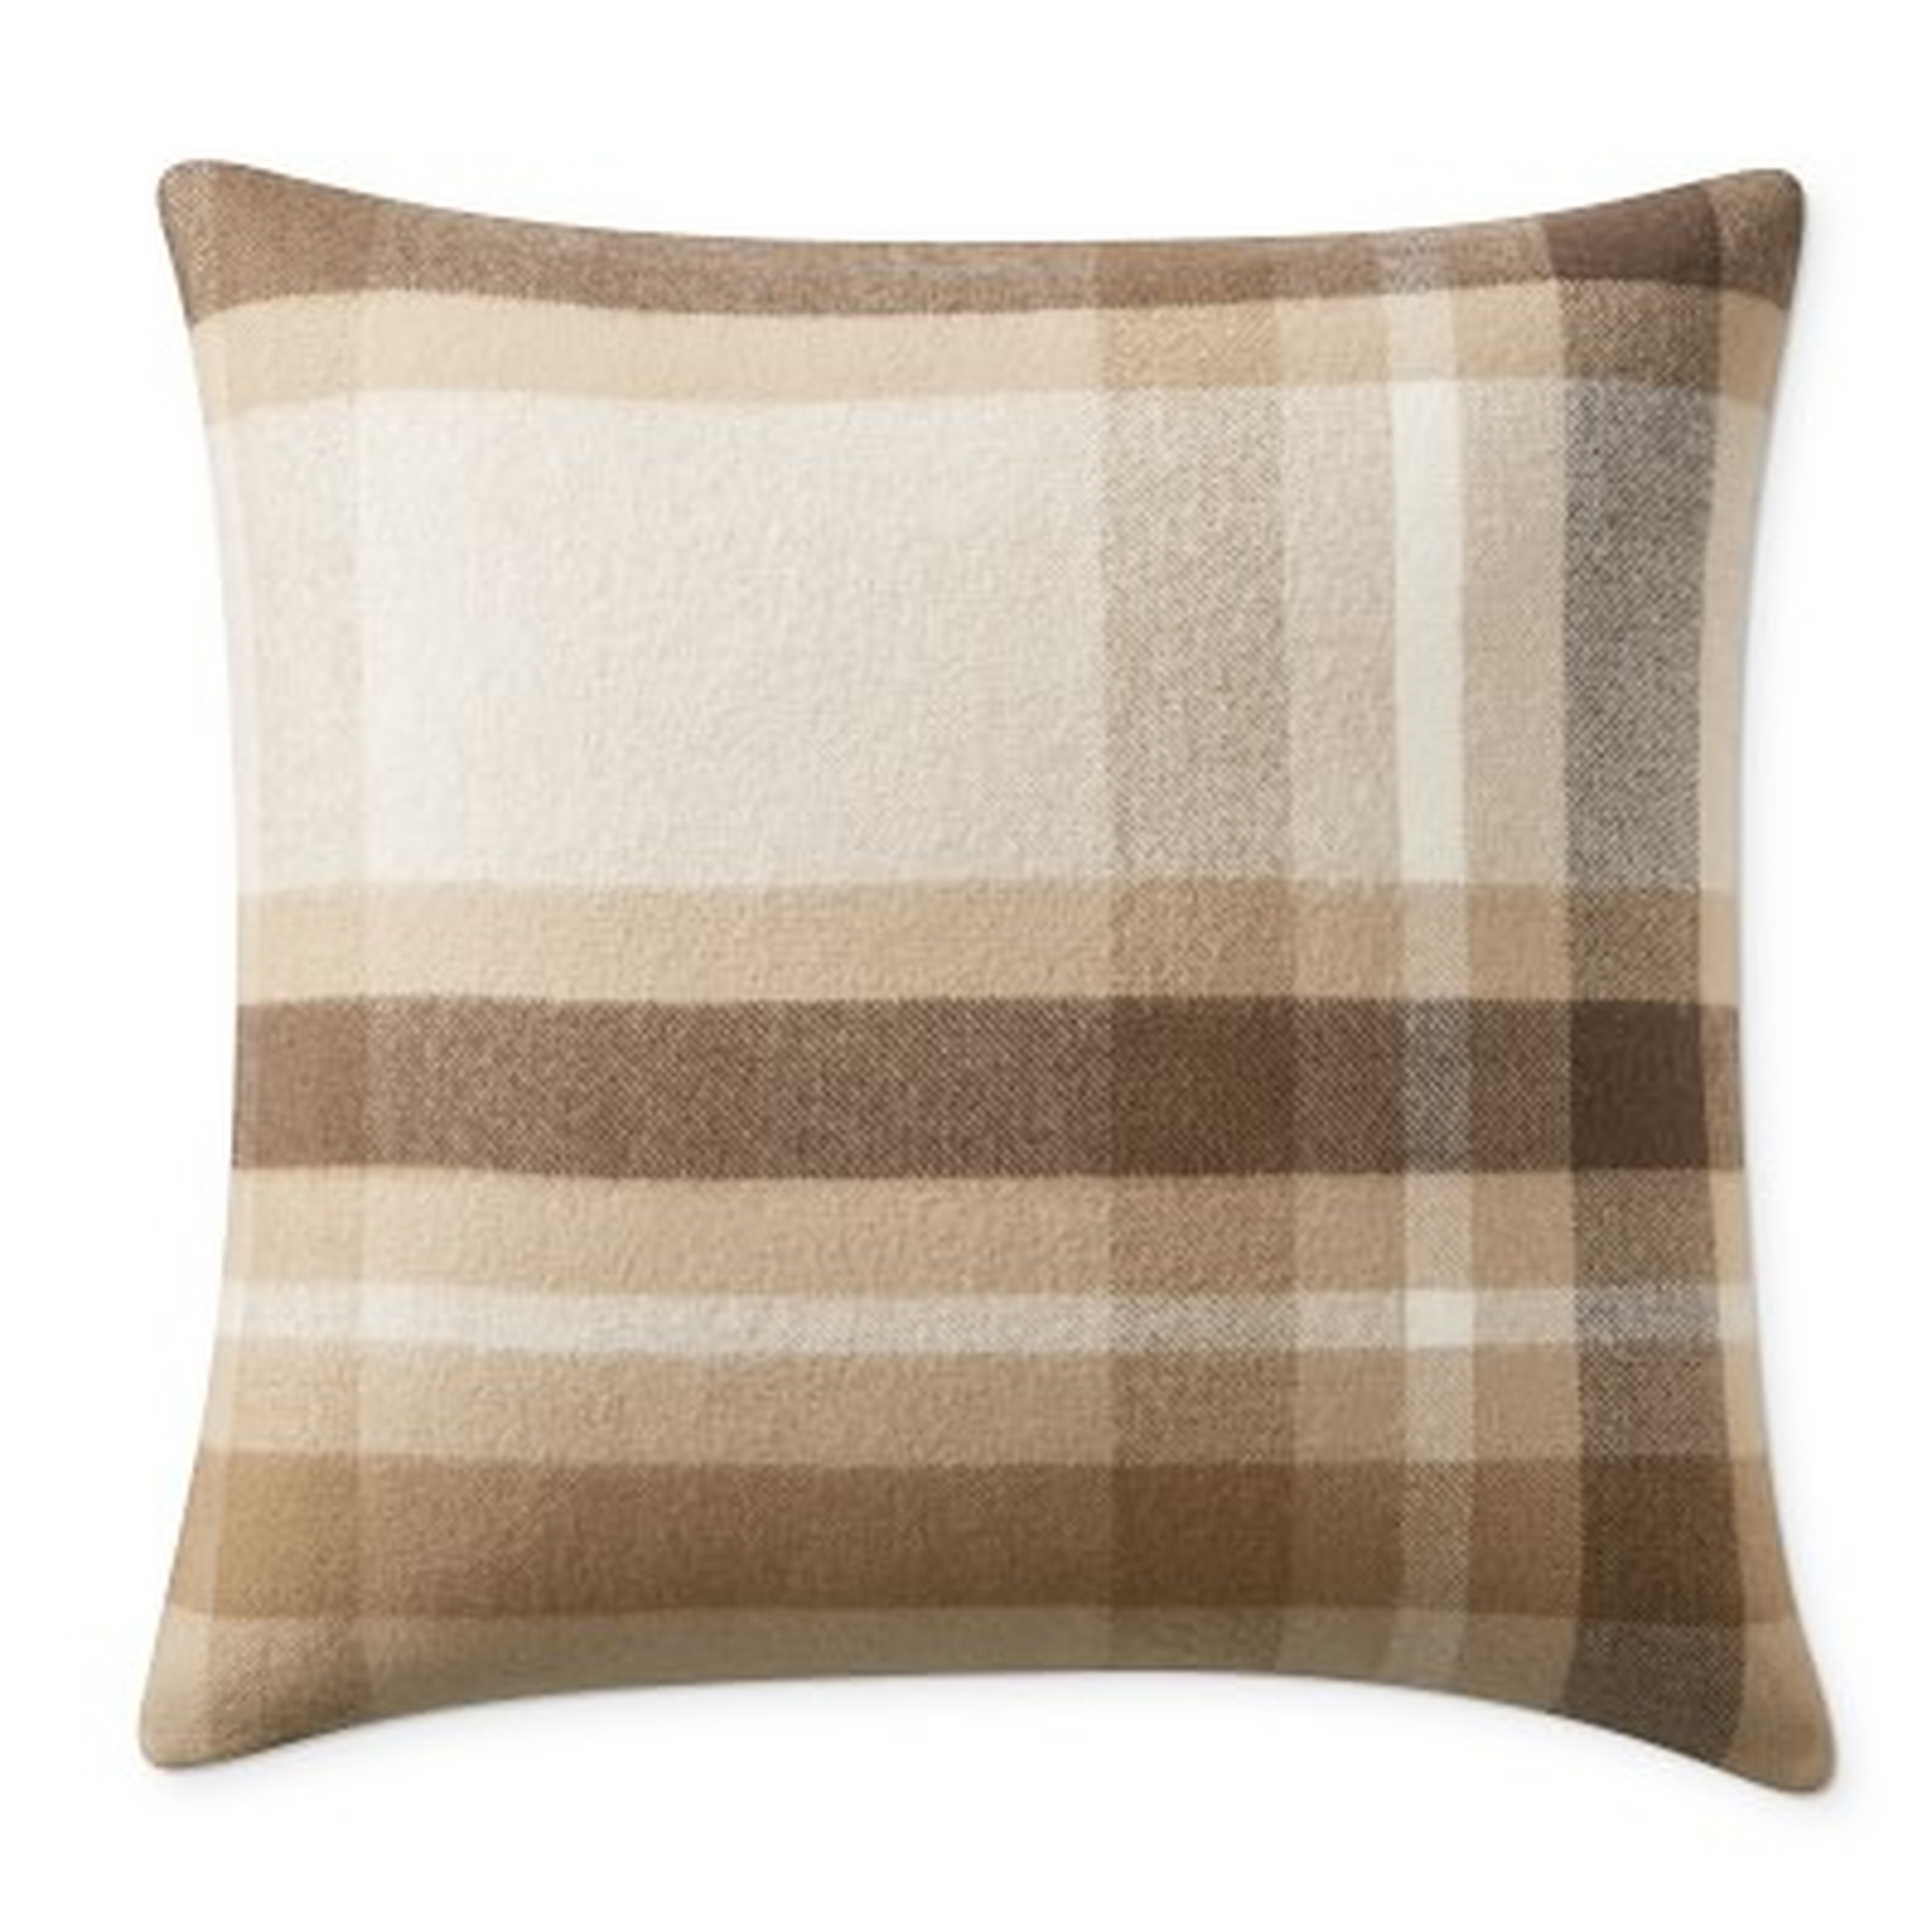 Plaid Lambswool Pillow Cover, 22" X 22", Lewes - Williams Sonoma